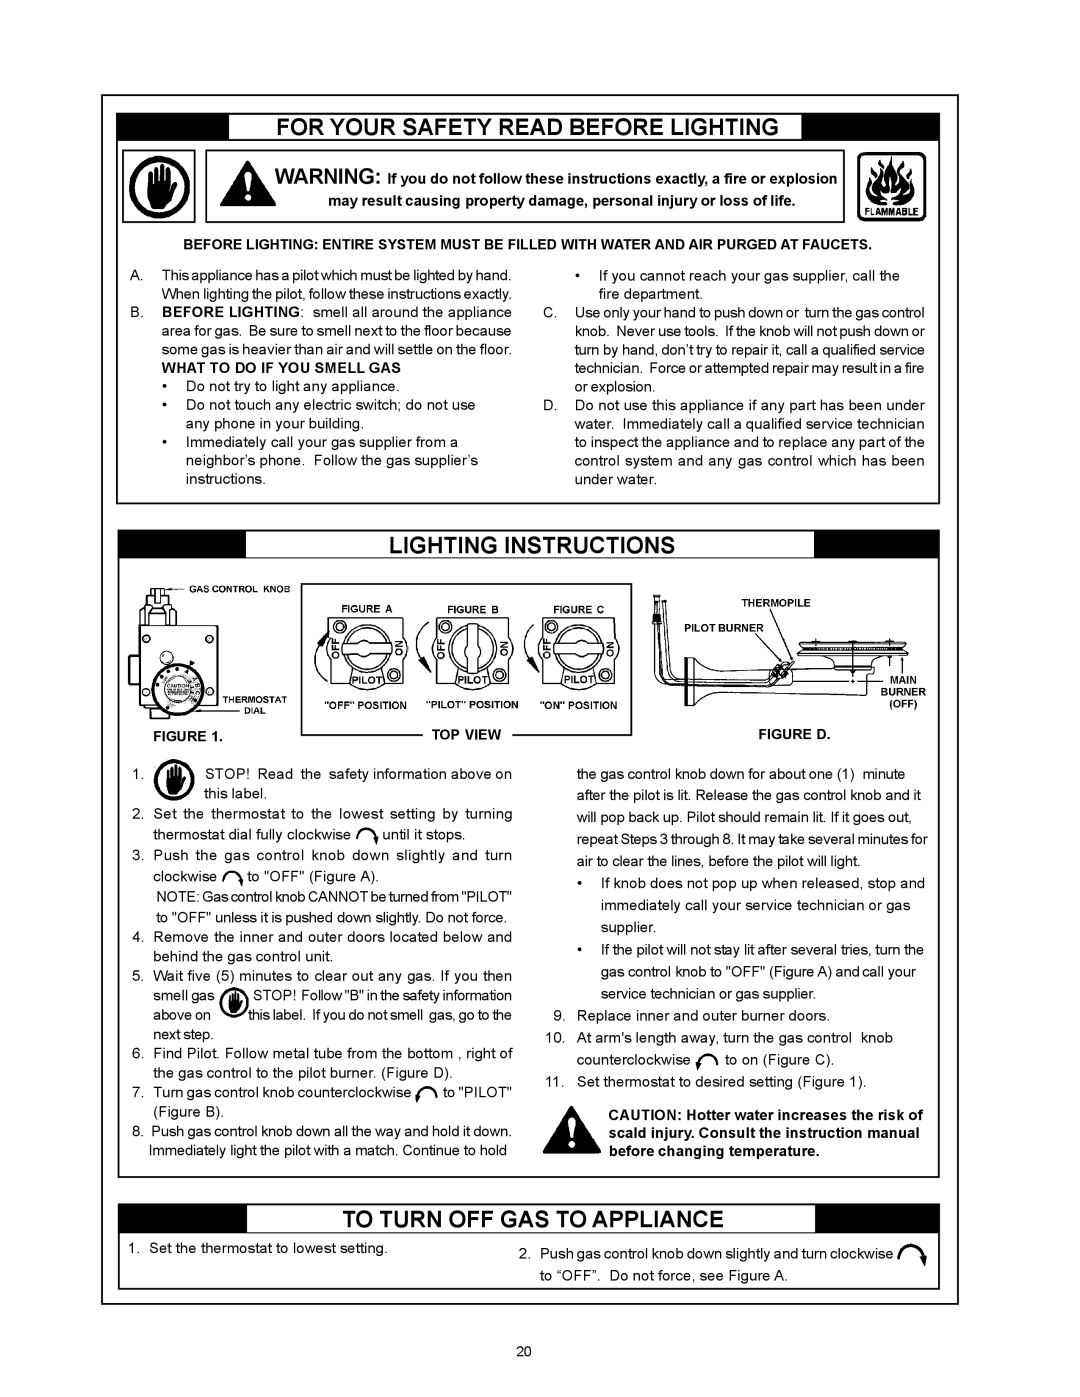 Maytag HXN4975S manual For Your Safety Read Before Lighting, Lighting Instructions, To Turn Off Gas To Appliance, Figure 